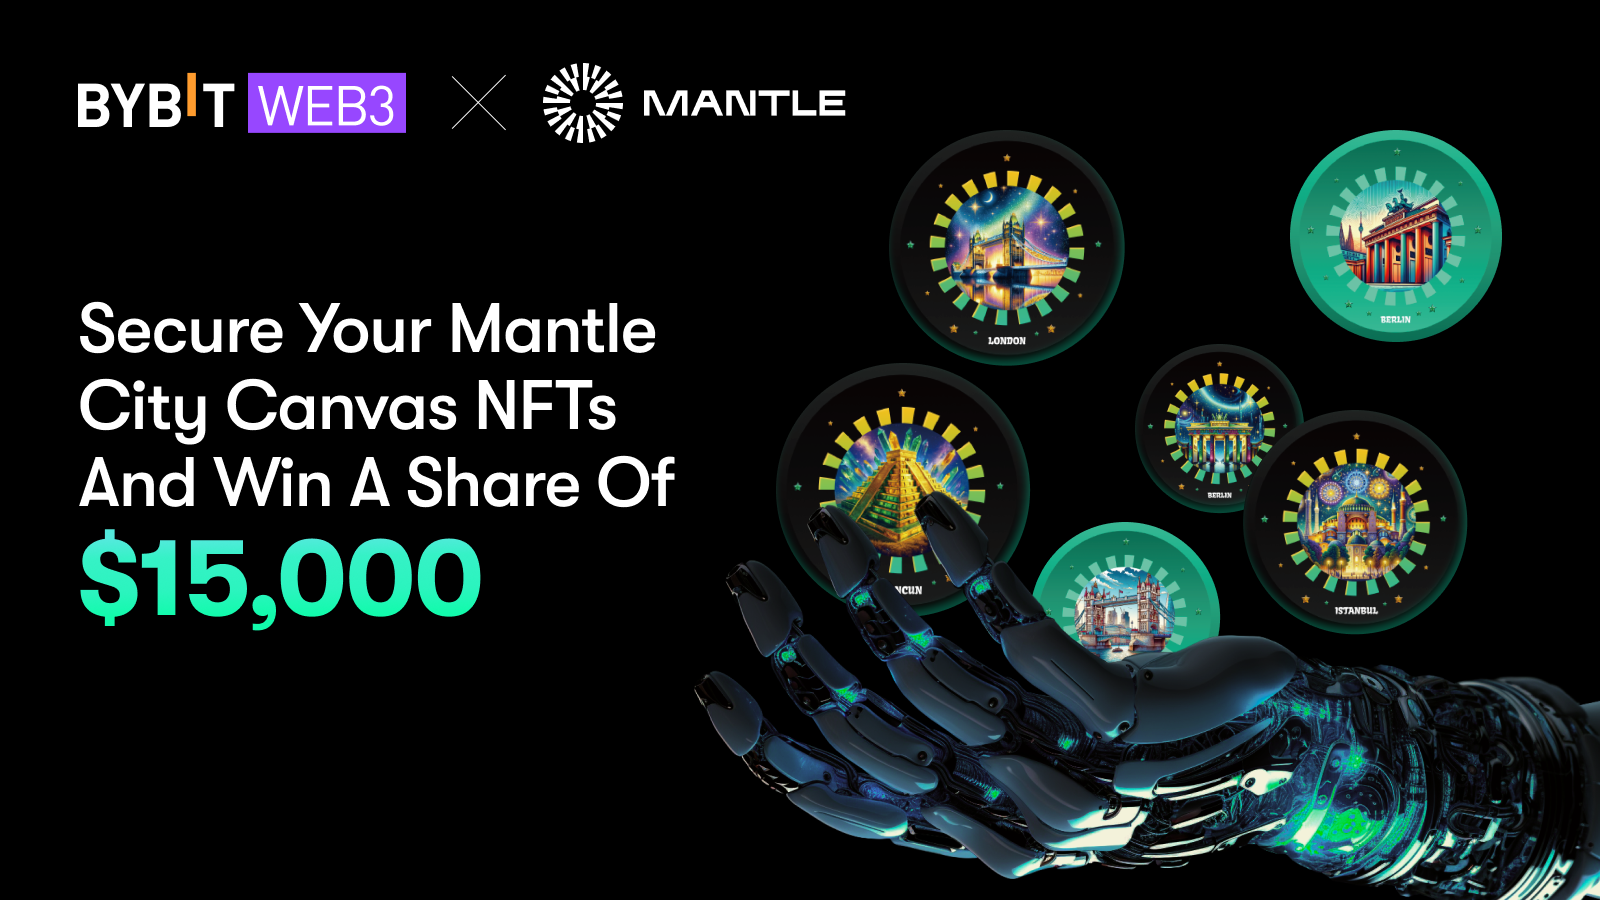 Grab Your Share of $15K and Exclusive Benefits With Mantle City Canvas NFTs